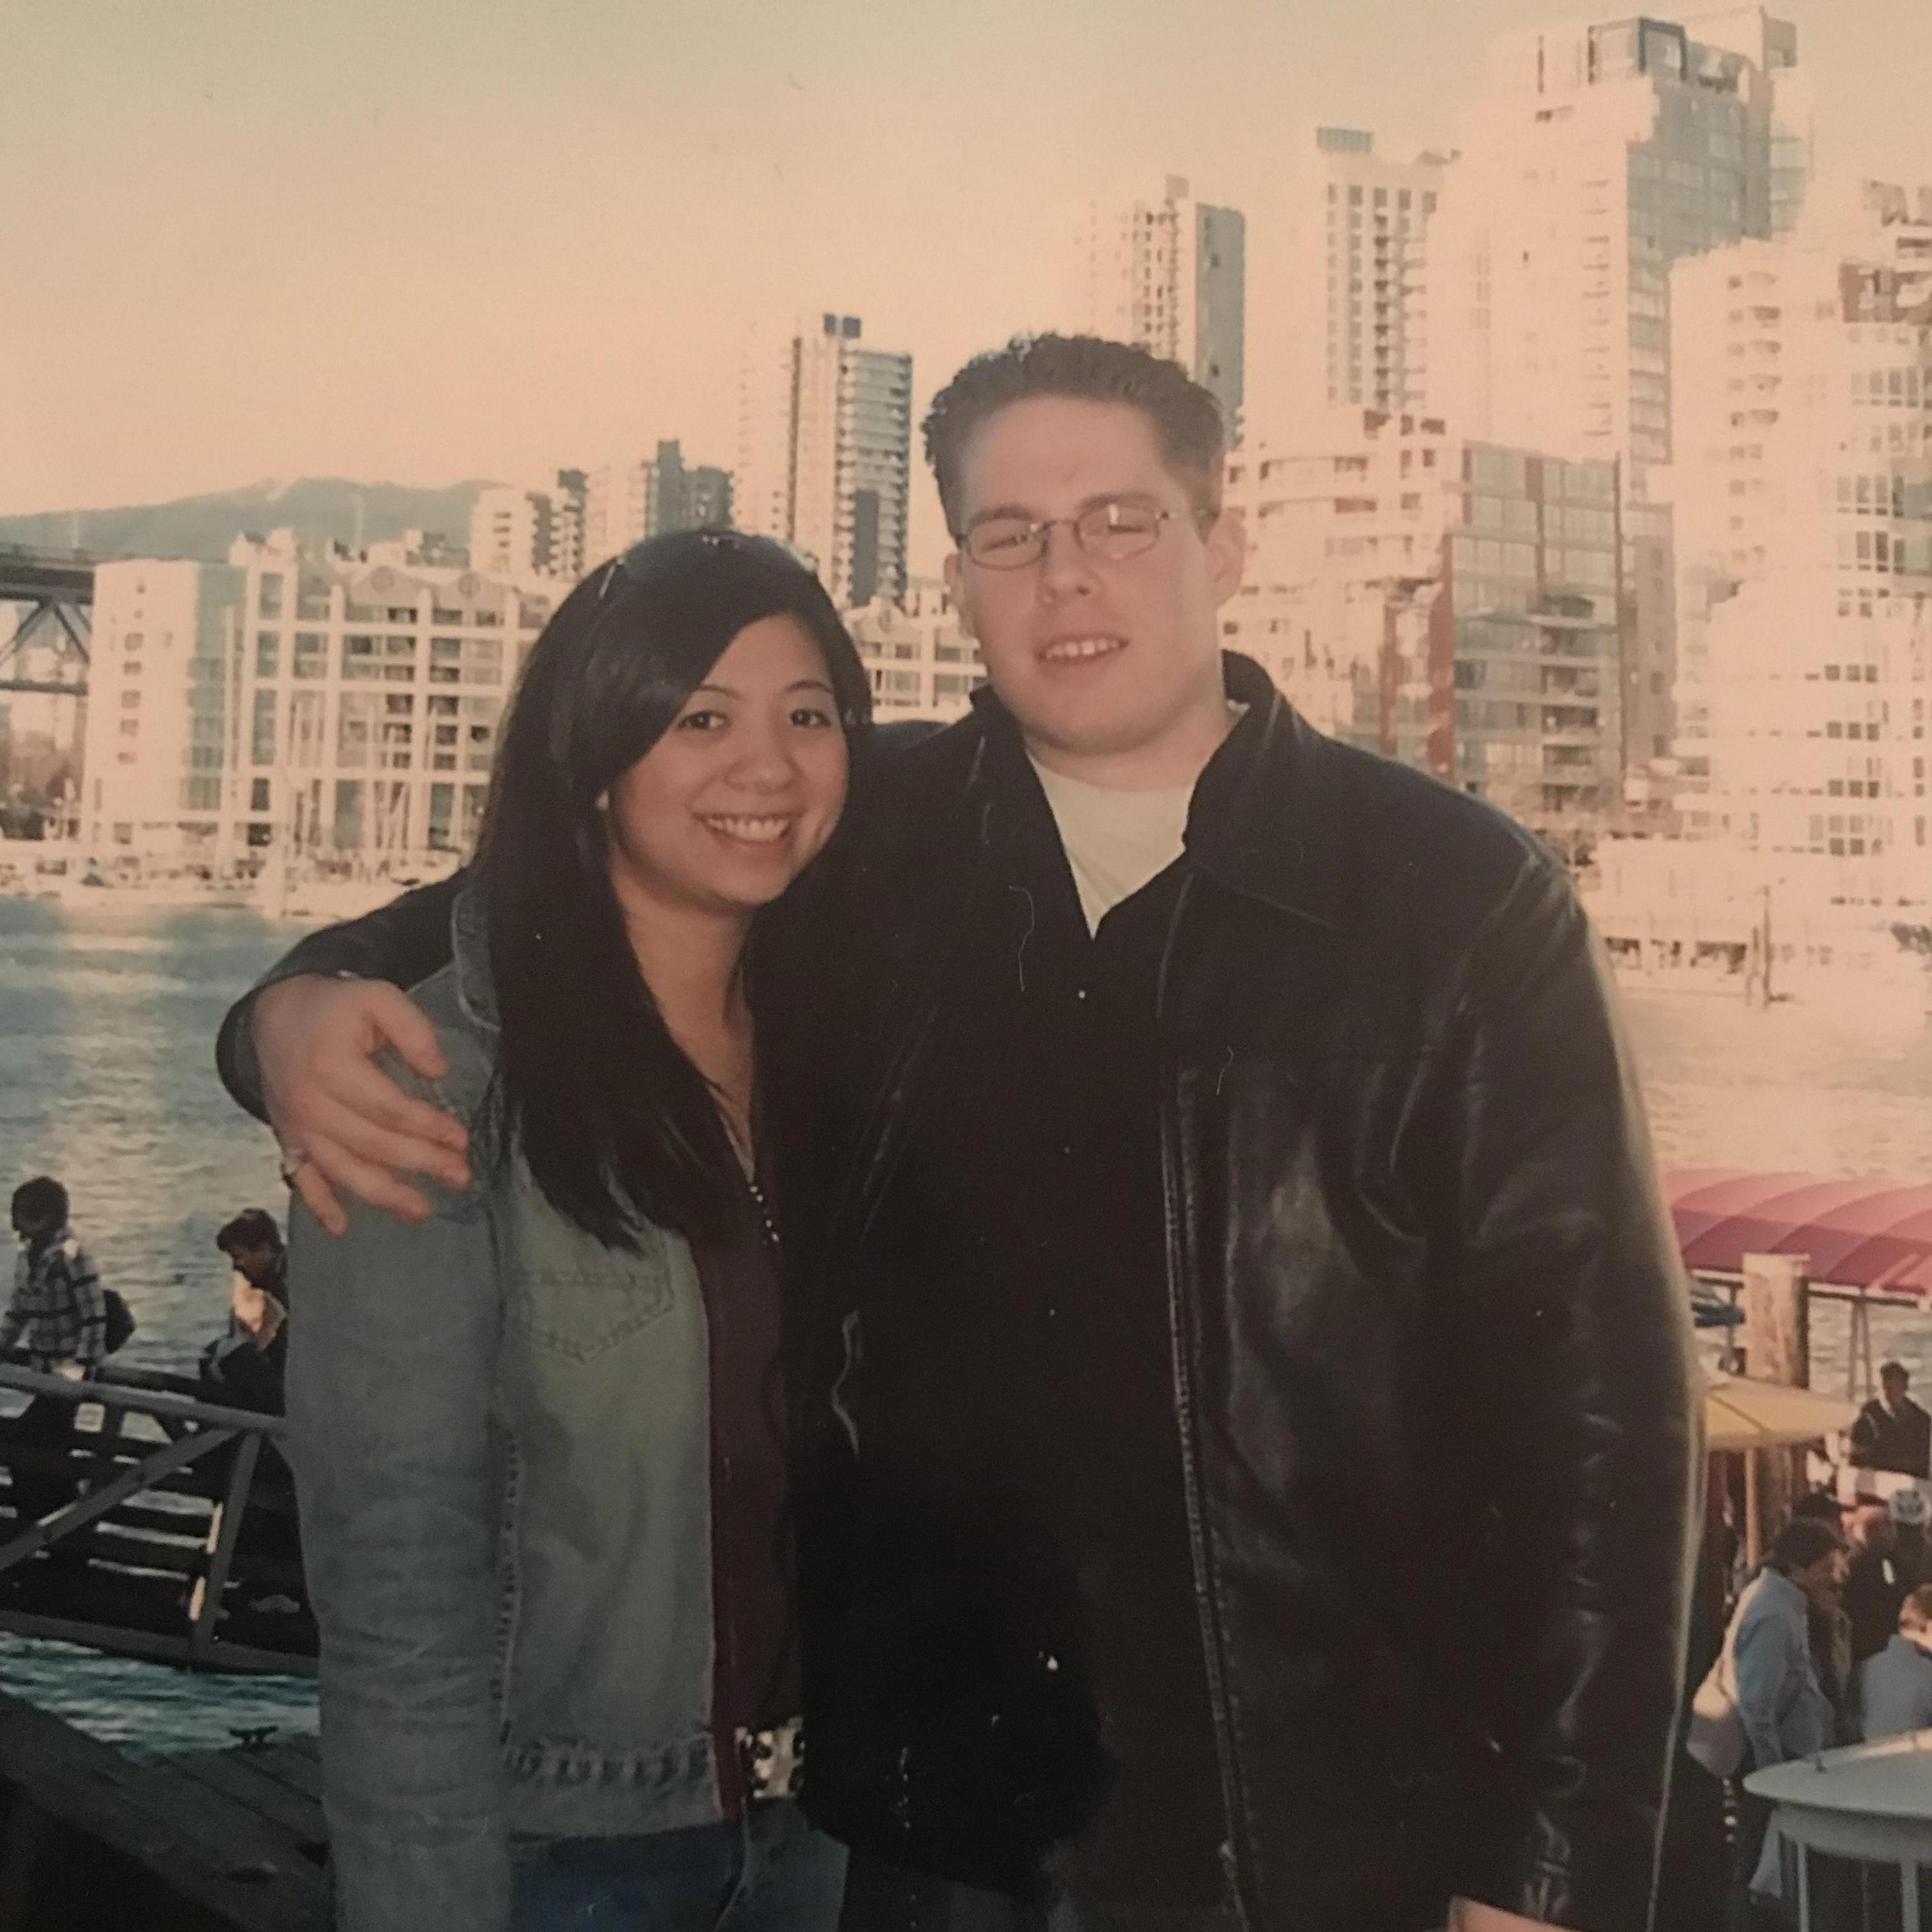 2005: Celebrated our 6th month anniversary on Granville Island, 7 years later we ended up renting our first place together in the same neighbourhood.